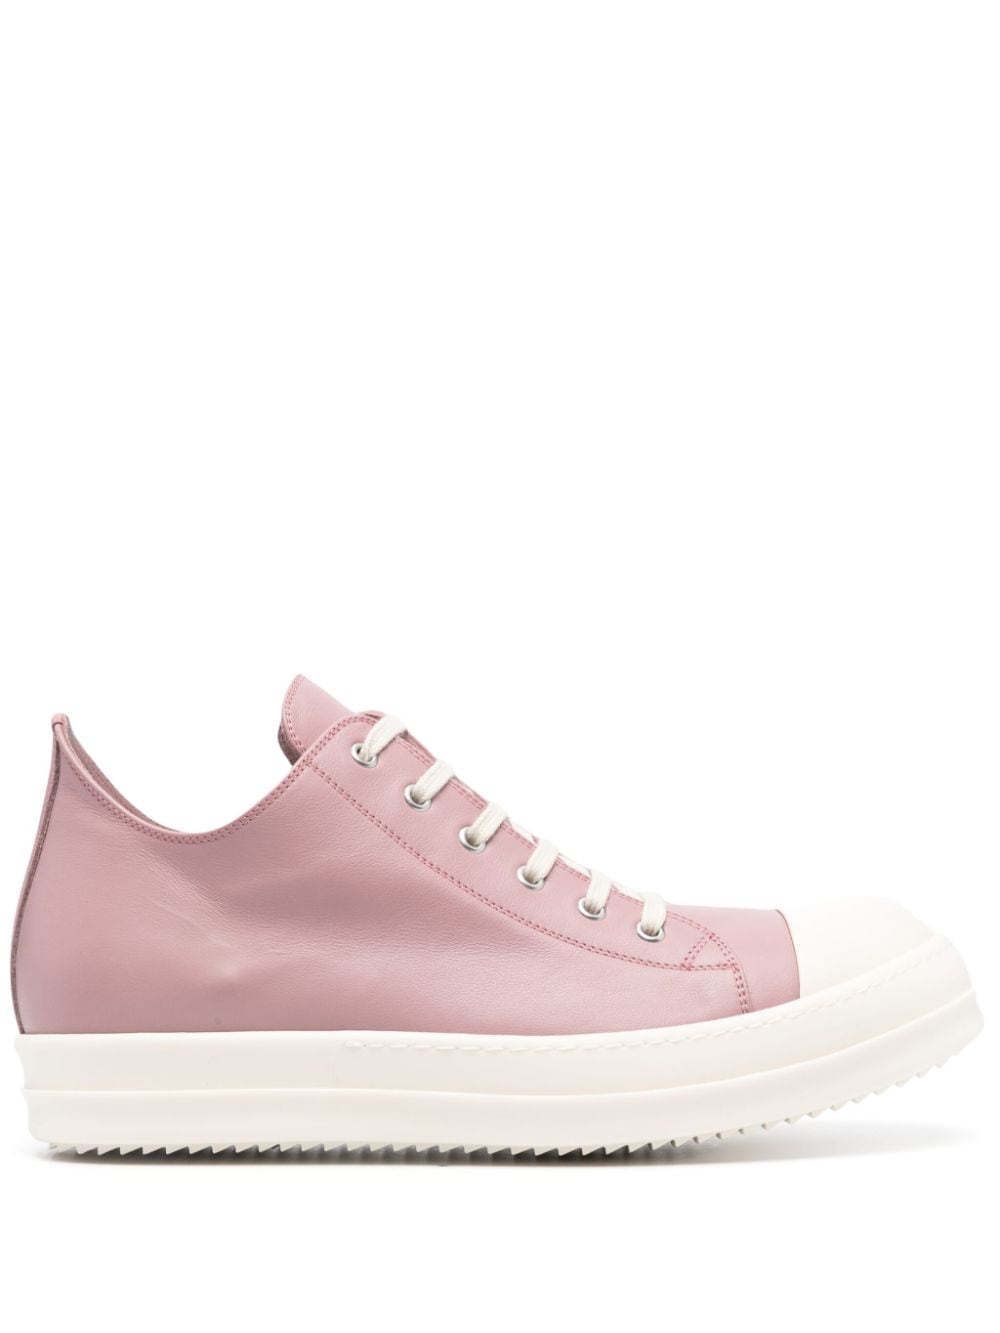 Rick Owens Lido leather low-top sneakers - Pink von Rick Owens